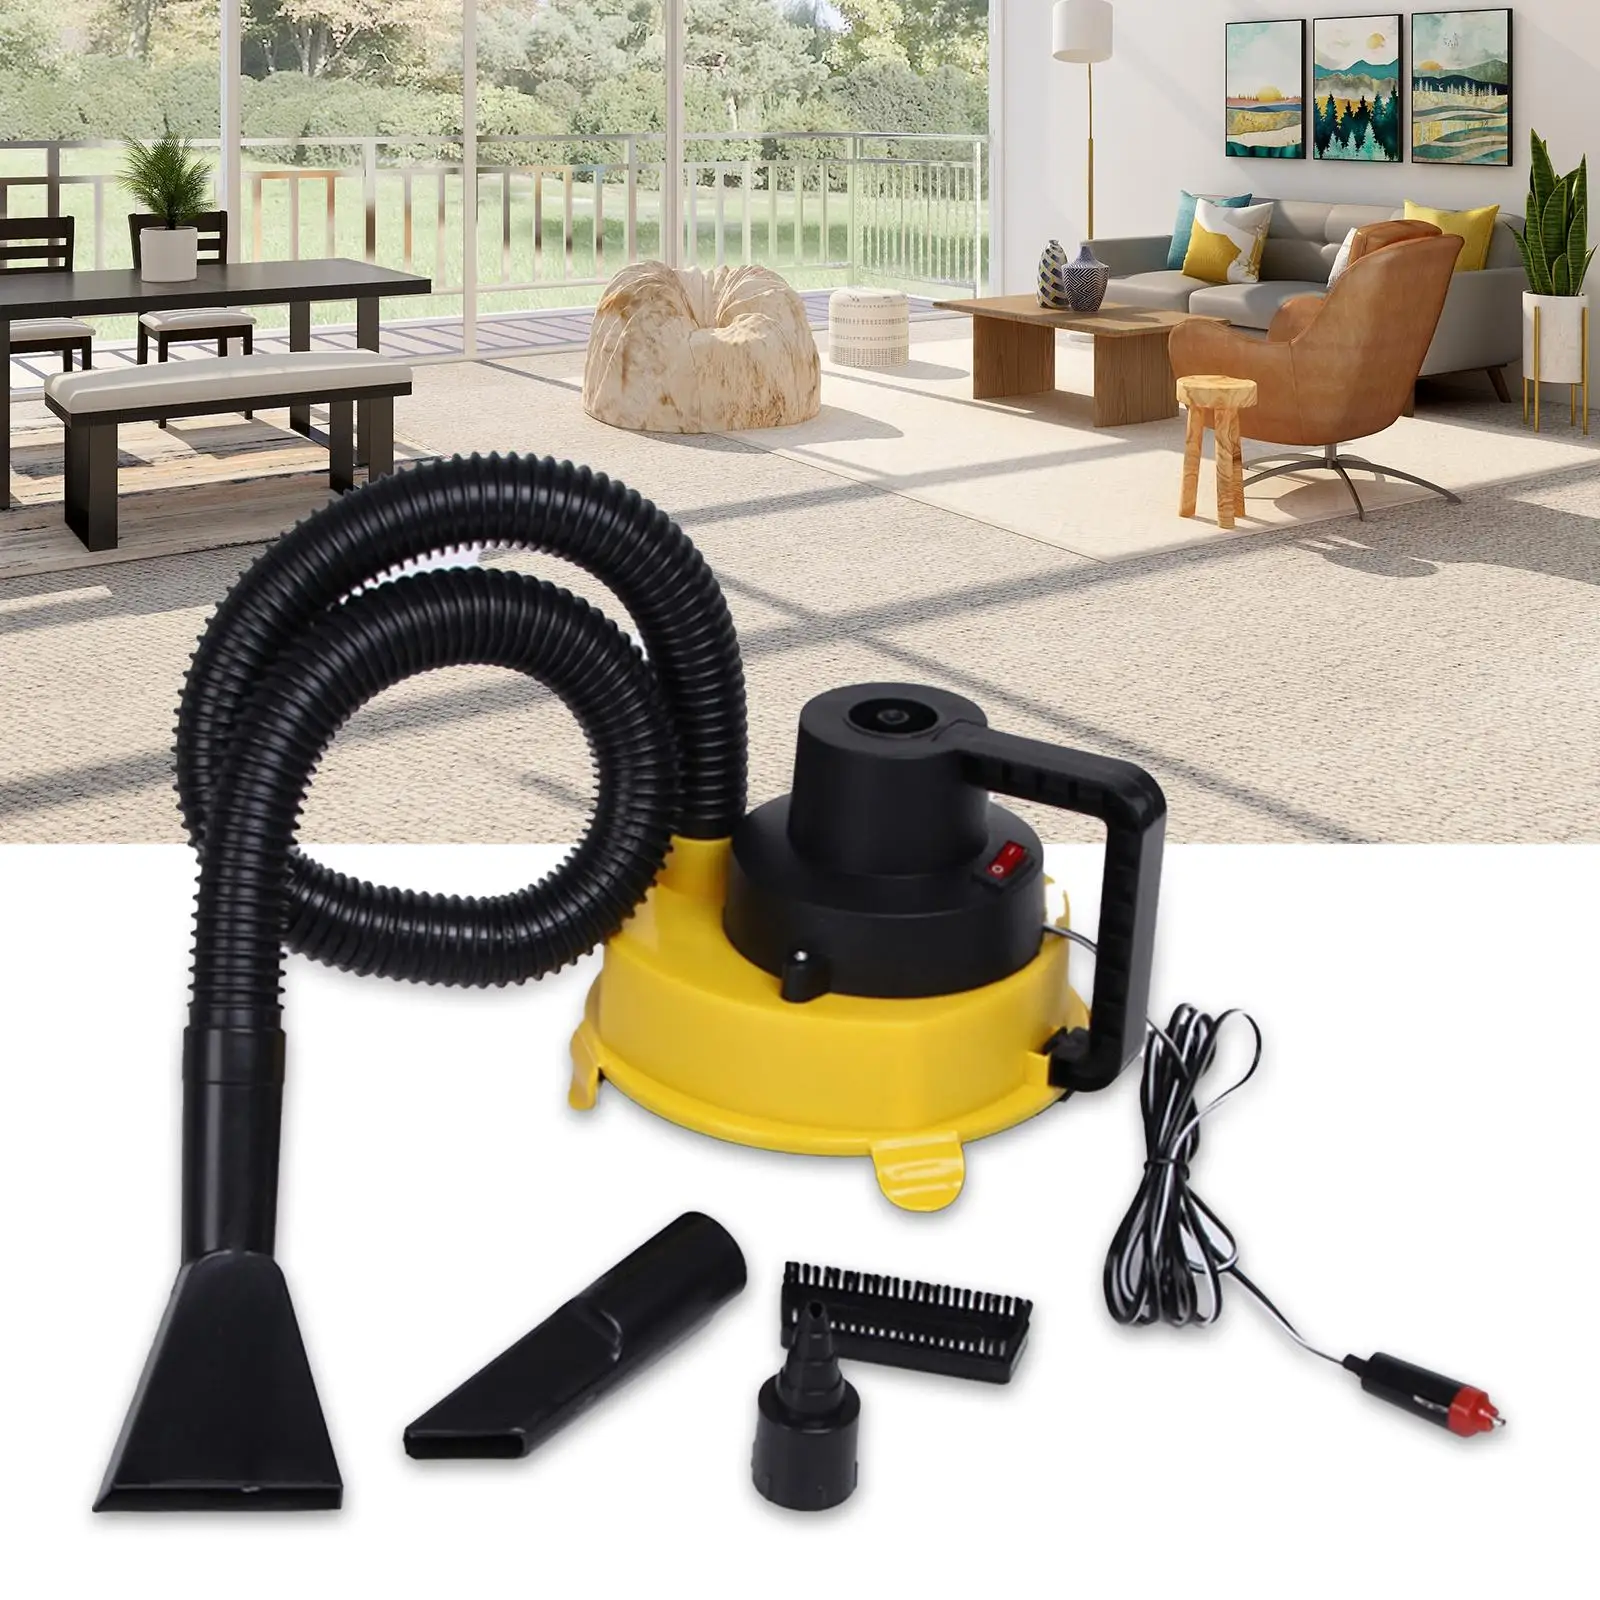 Car Vacuum Cleaner 12V Quick Cleaning Home Car Dual Use Portable Vacuum Cleaner Handheld Duster Dust Buster for Vehicle RV